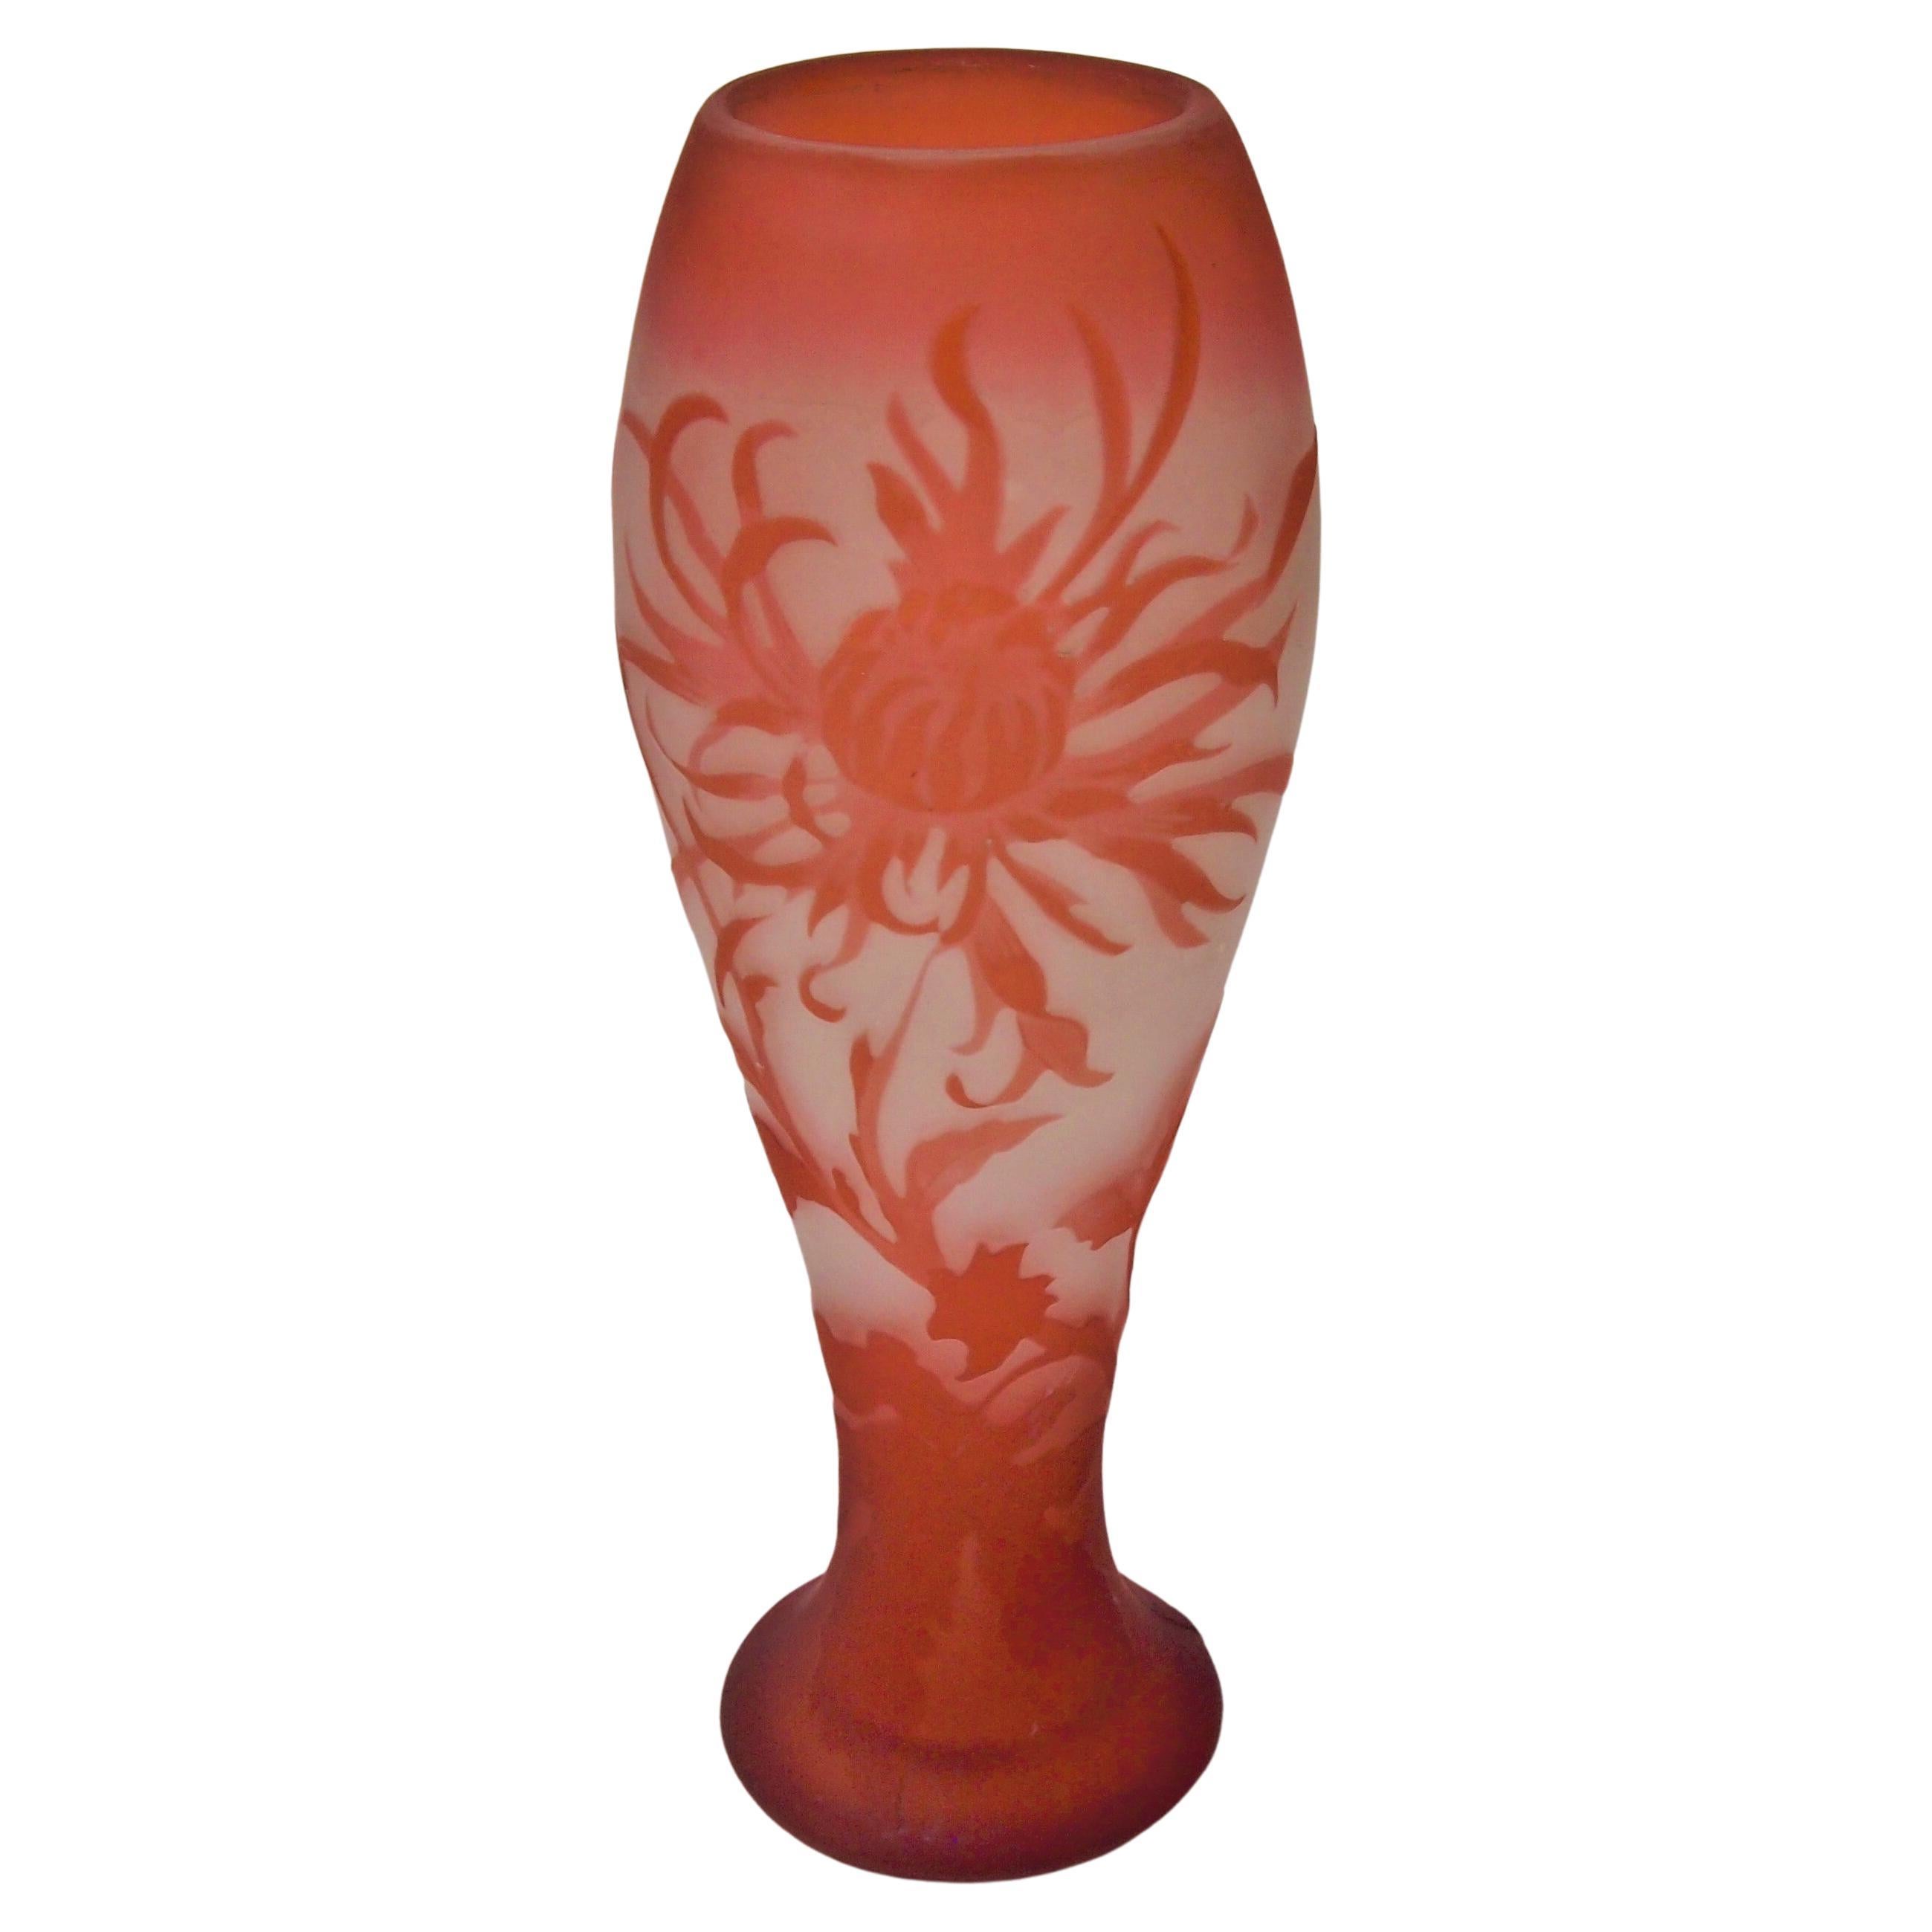 French Art Nouveau Emile Galle Cameo Glass Limited Edition Vase, circa 1900 For Sale